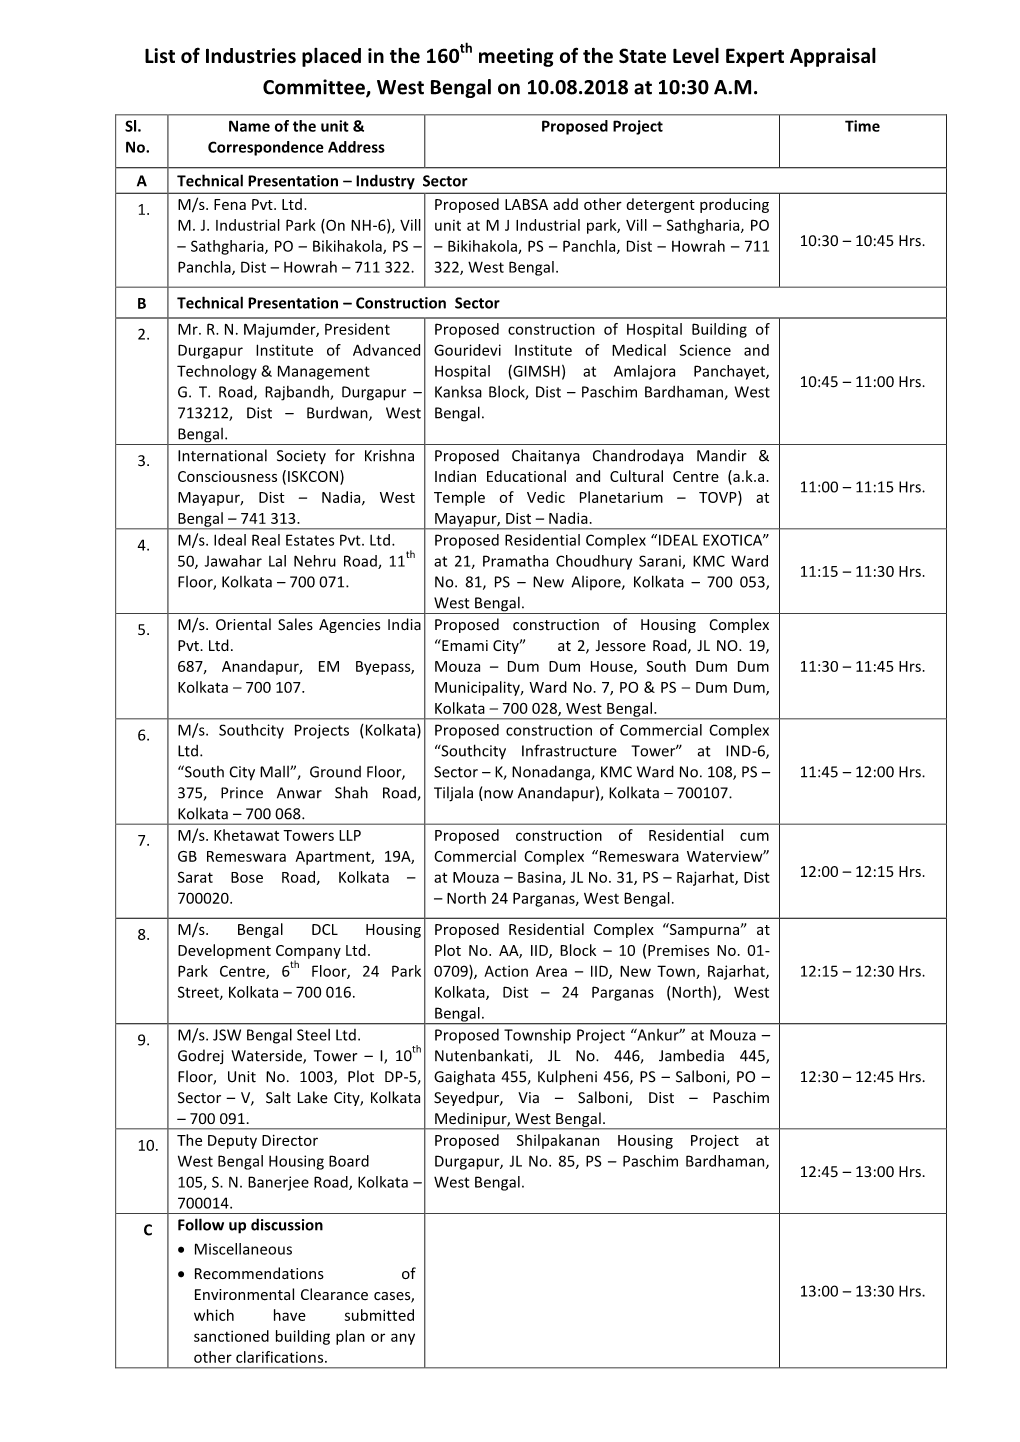 List of Industries Placed in the 160 Meeting of the State Level Expert Appraisal Committee, West Bengal on 10.08.2018 at 10:30 A